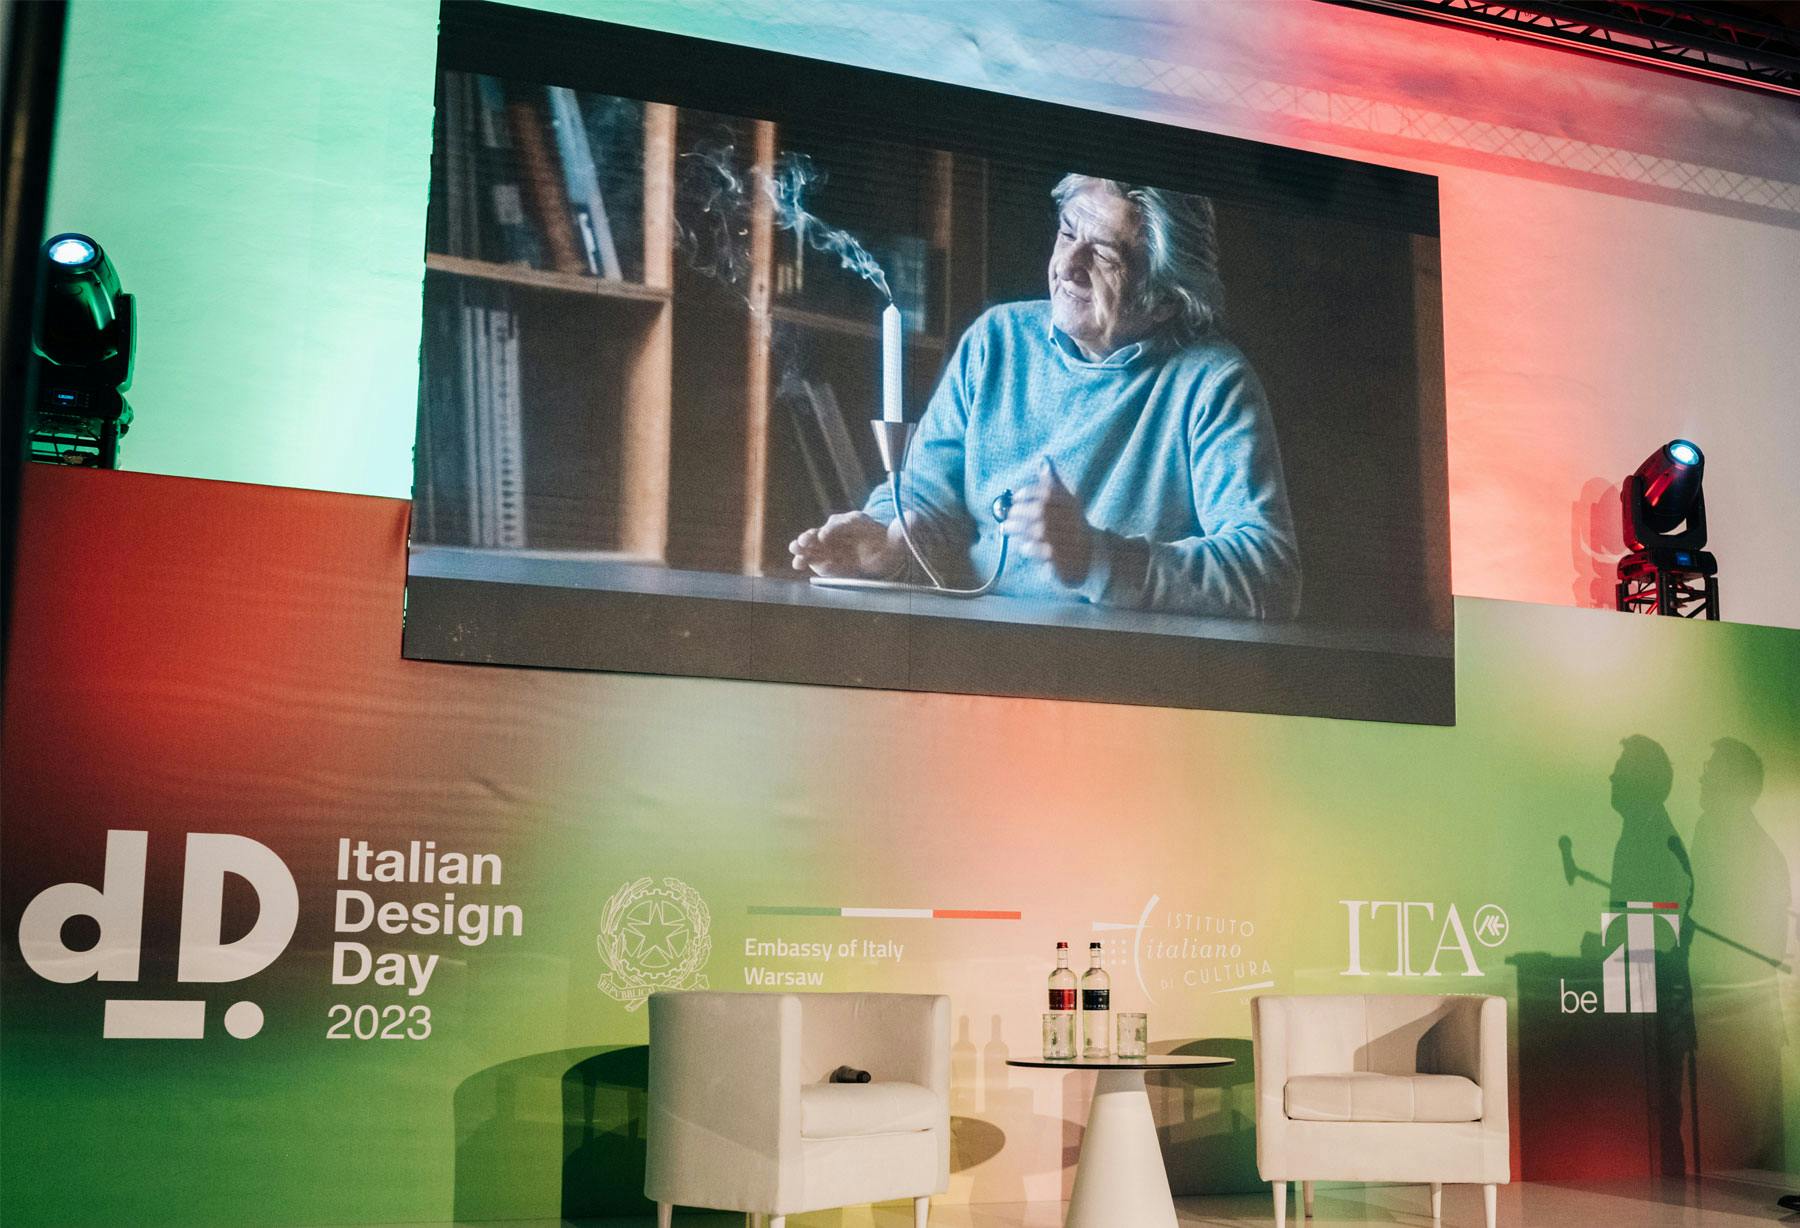 <p>Catellani &amp; Smith is selected as one of the most representative Italian companies for the 2023 edition of the Italian Design Day, dedicated to the lighting sector. The inauguration took place in Rome on 8 March, entitled “La qualità che illumina, l’energia del design per la persona e l’ambiente” (Illuminating quality: design energy for people and the environment). It was followed by other events in collaboration with the Italian Embassies worldwide, in which a selection of lamps created by Enzo Catellani was presented to the public.</p>
